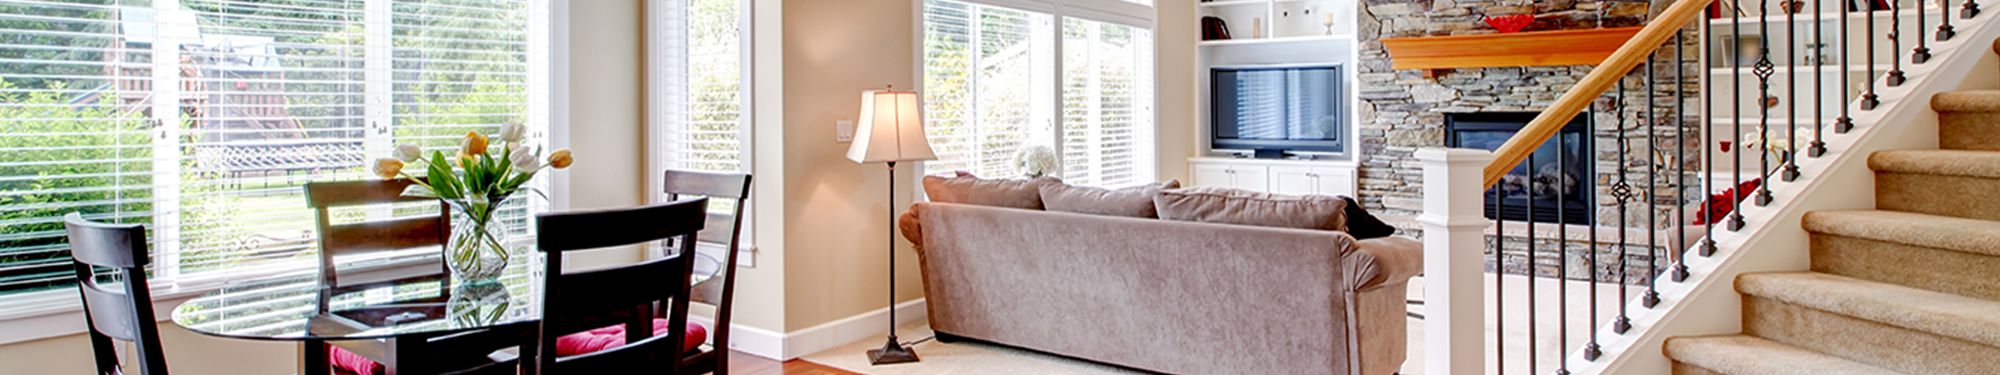 Custom blinds installation services in North San Diego